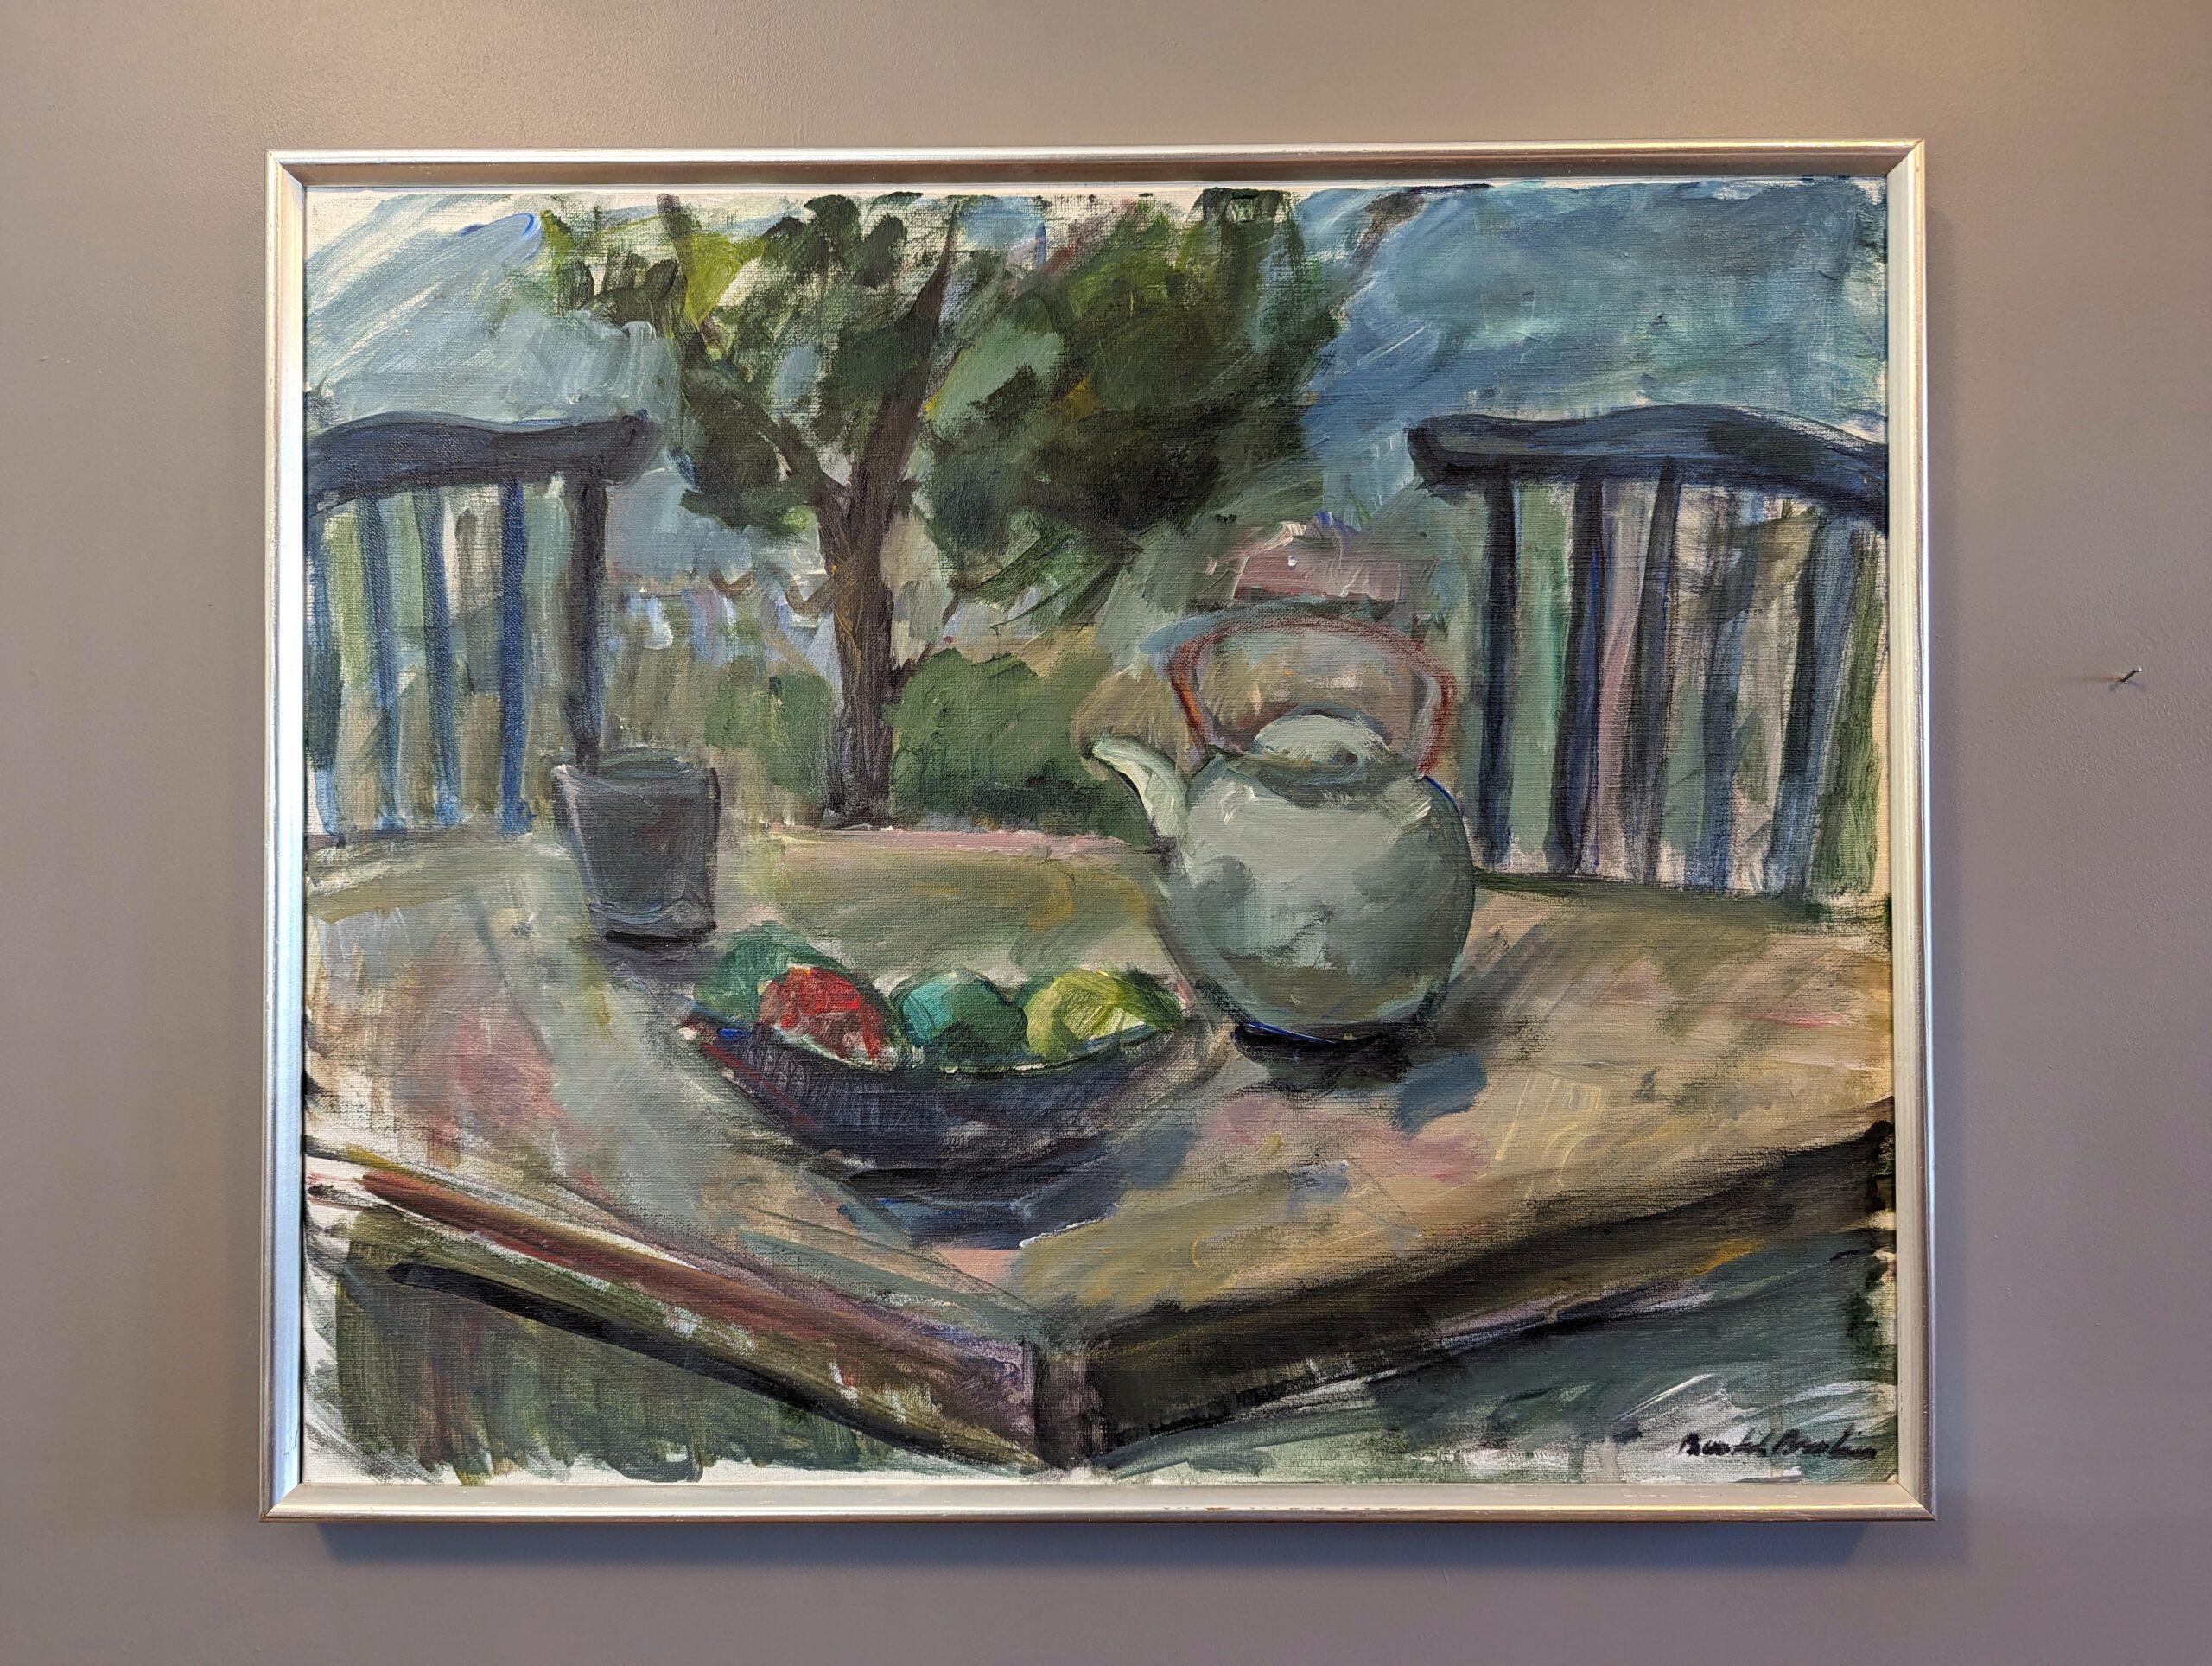 AL FRESCO BLUES 
Size: 52.5 x 63.5 cm (including frame)
Oil on Canvas

A charming and inviting mid-century painting, executed in oil onto canvas.

In this composition, the artist captures the essence of an afternoon in the open air, as it features a